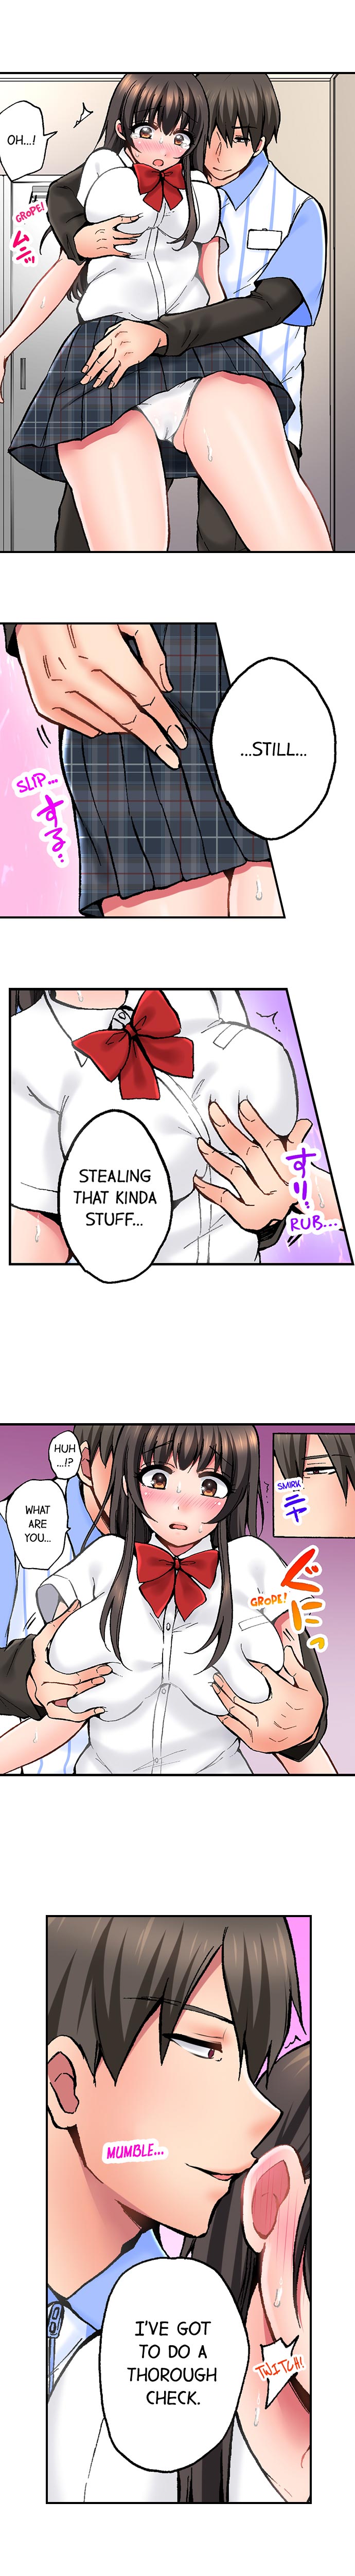 You Stole Condoms, so I Can Steal Your Virginity, Right? - Chapter 1 Page 9